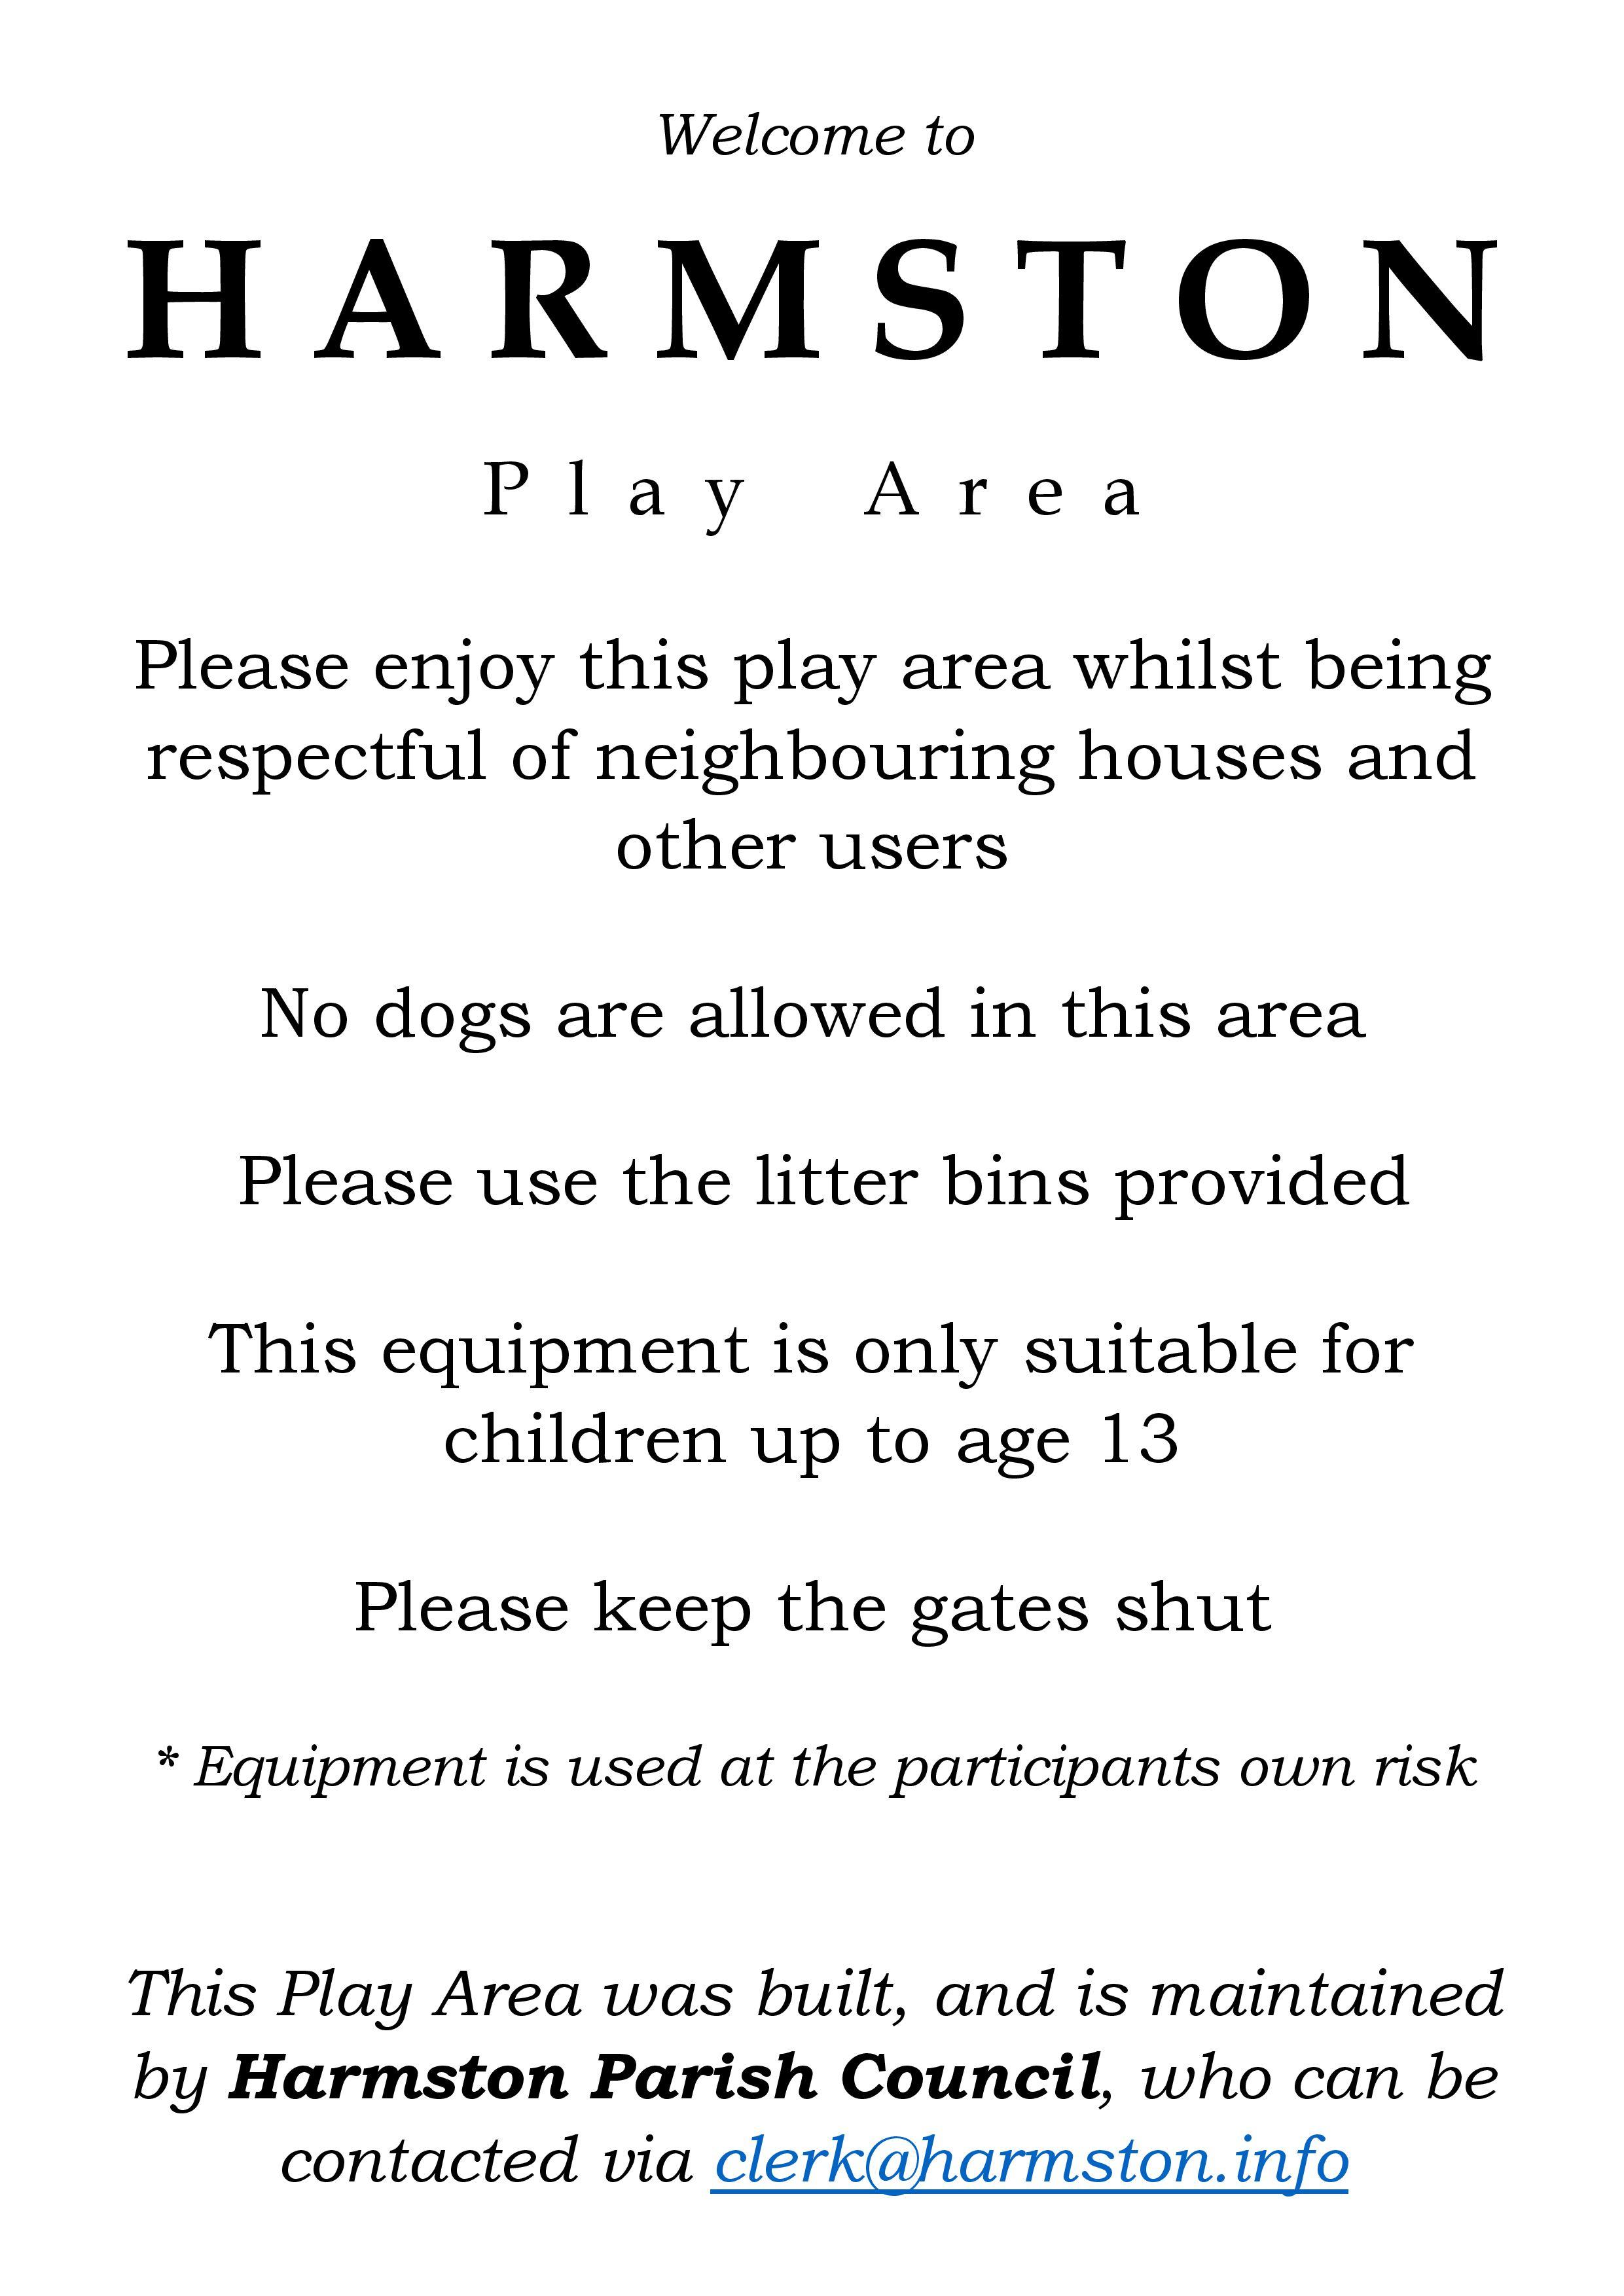 Play area rules